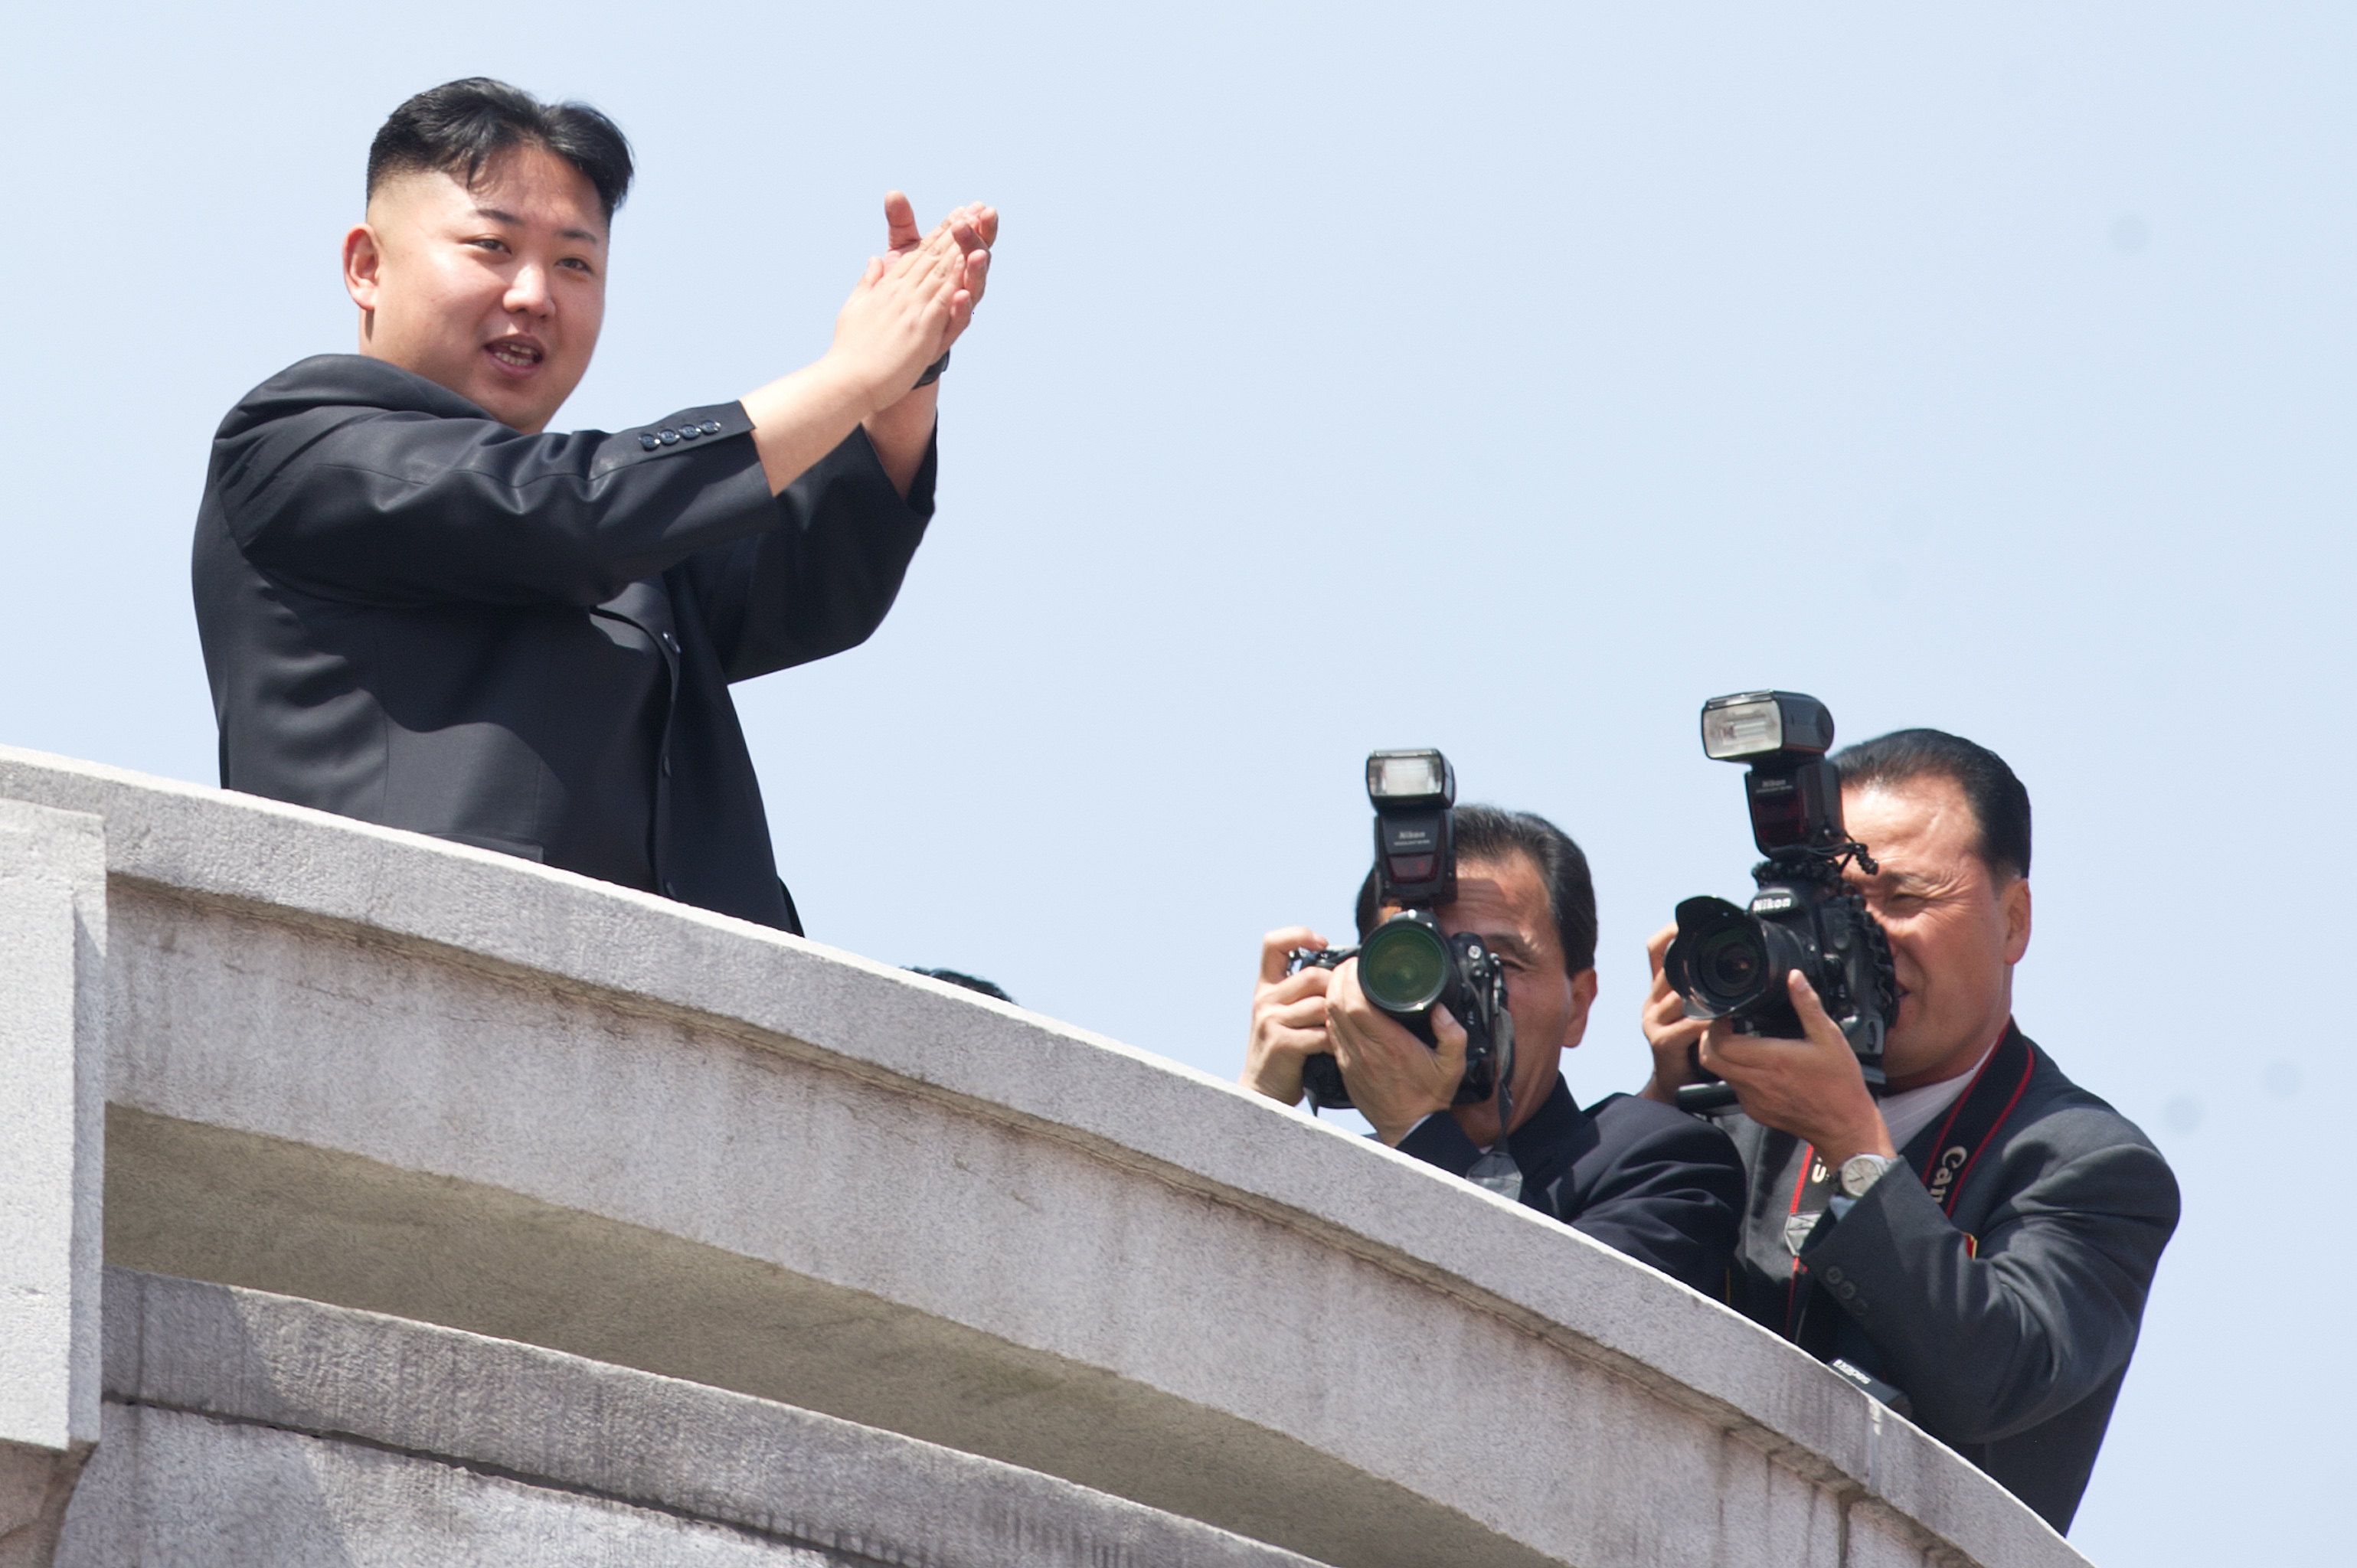 North Korean leader Kim Jong-Un (L) applauds during a military parade in honour of the 100th birthday of the late North Korean leader Kim Il-Sung in Pyongyang on April 15, 2012. (ED JONES—AFP/Getty Images)